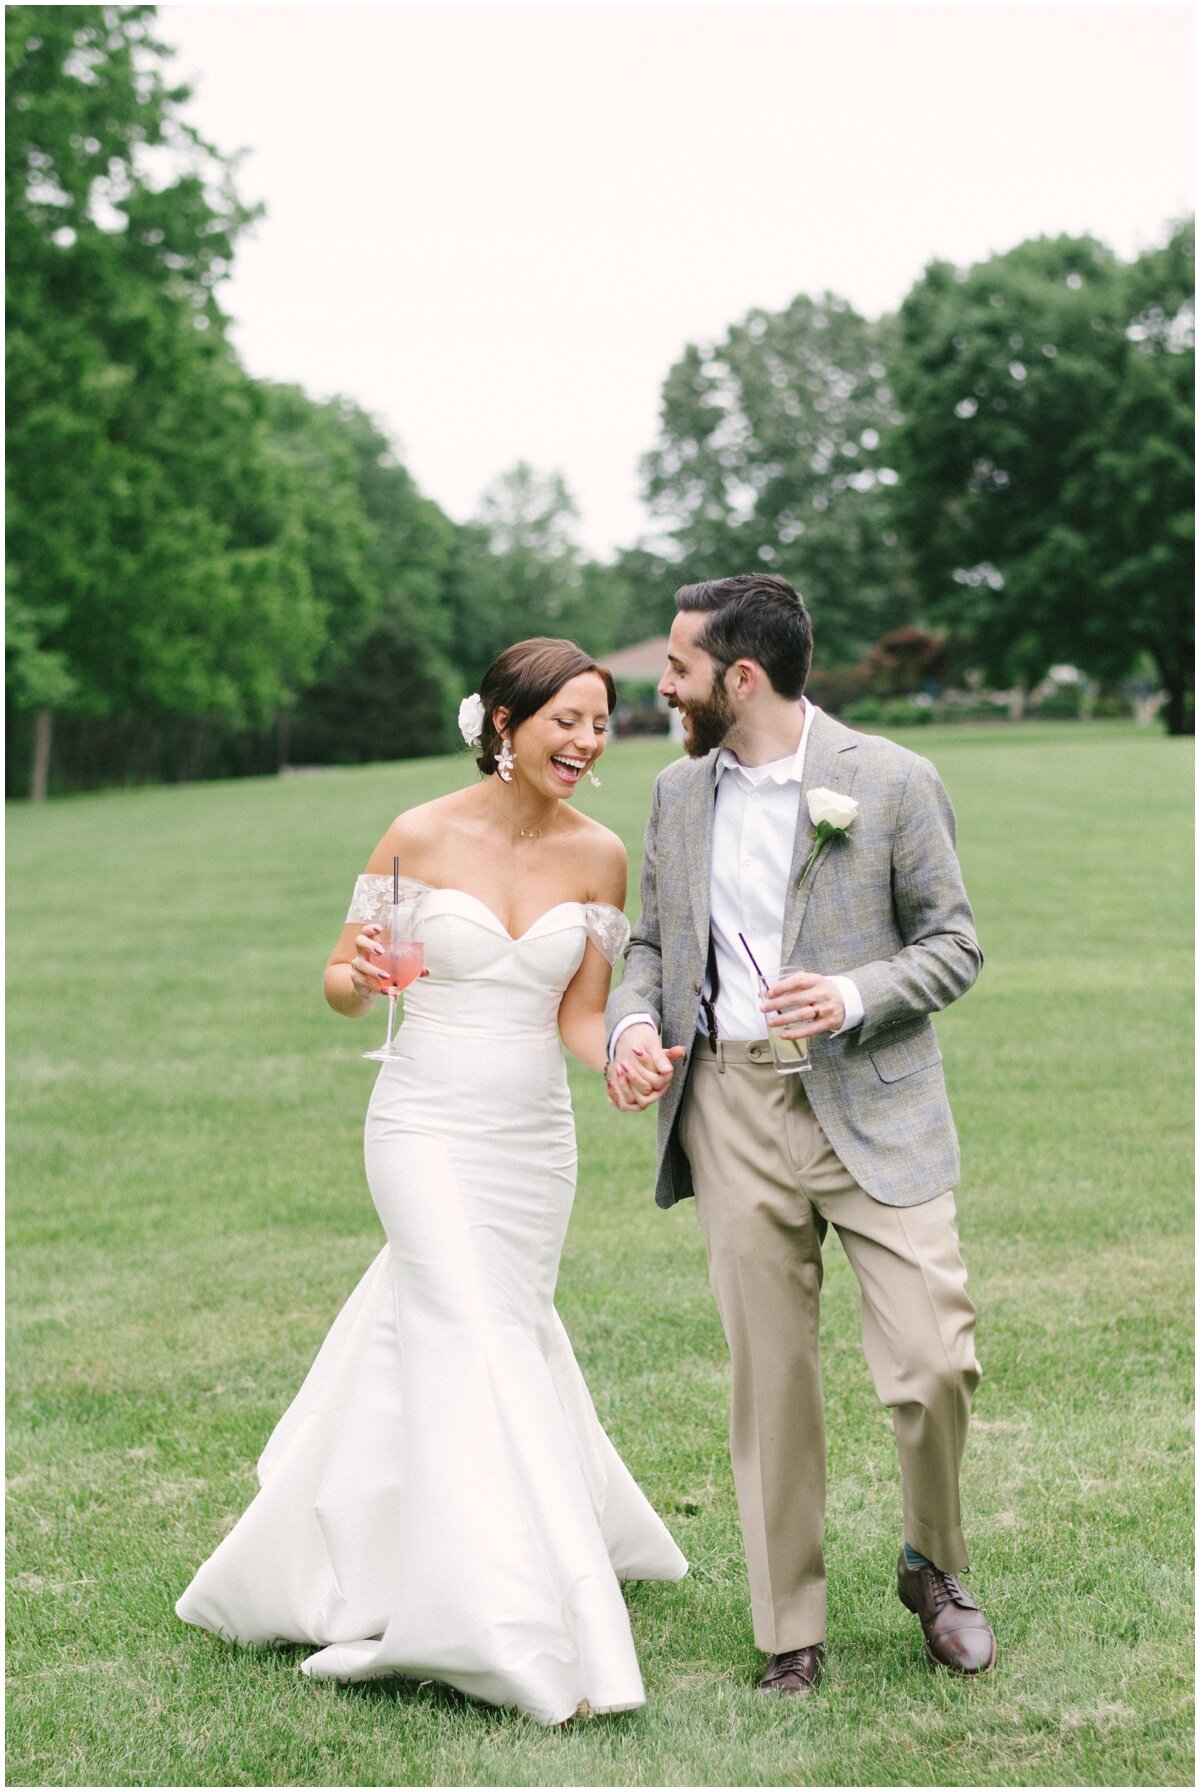  Bride and groom at private estate wedding in NJ during private estate wedding 